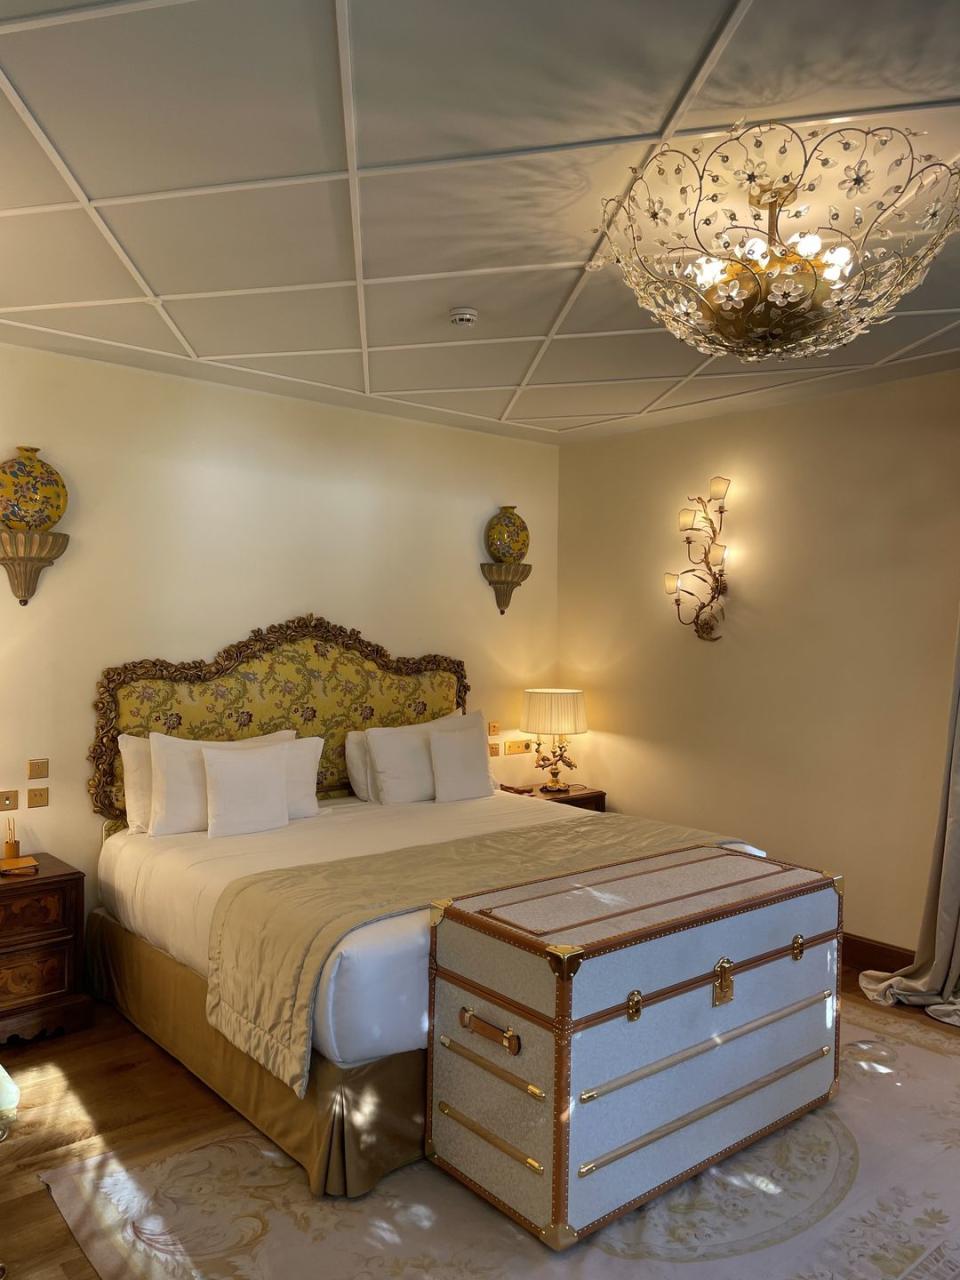 a bed with a chandelier above it